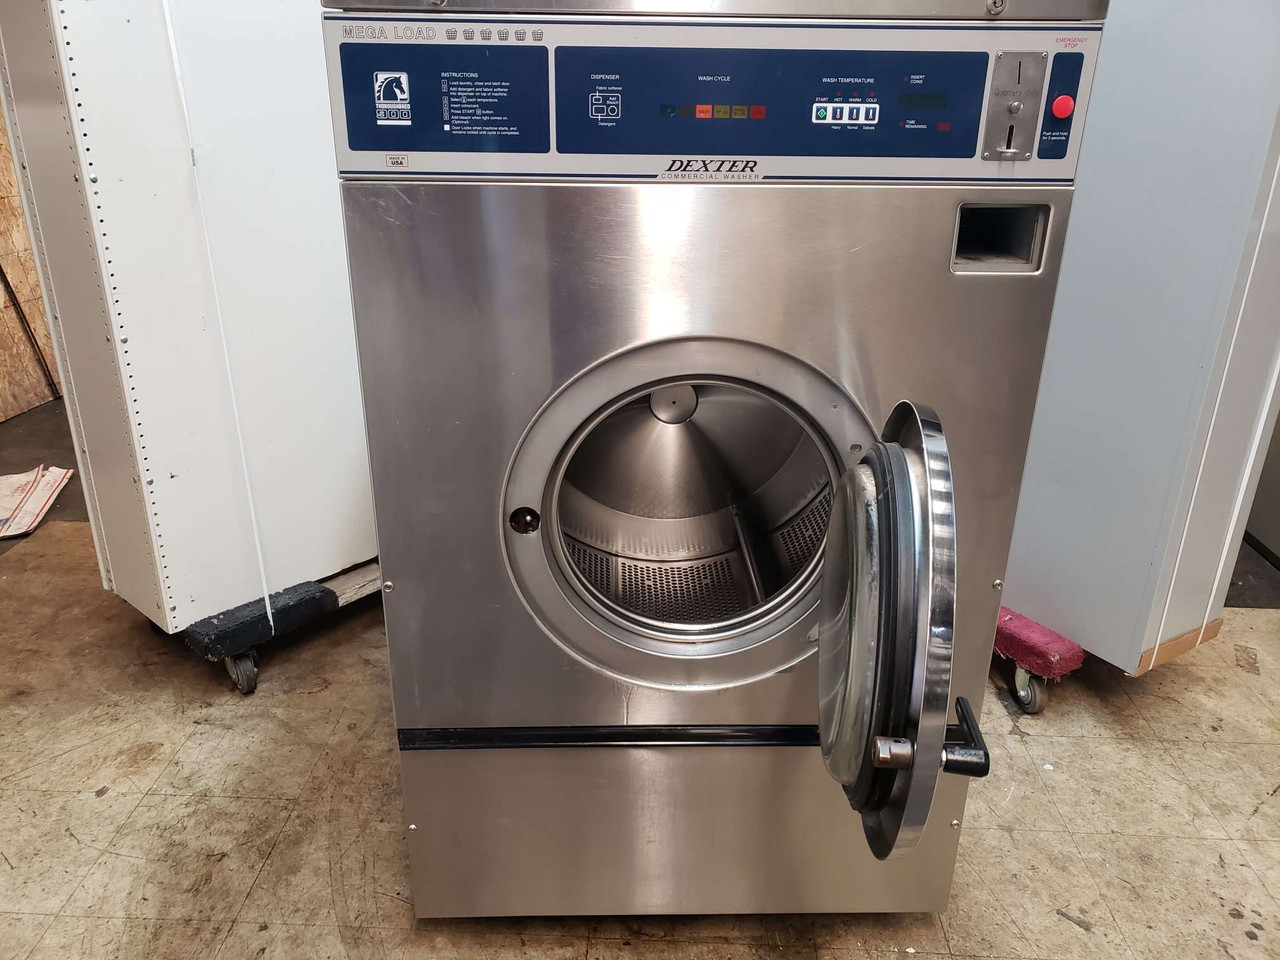 DEXTER T900 COMMERCIAL FRONT LOAD WASHING MACHINE, MODEL : WCAD55KCS-12  SERIAL NO : 20511000485996